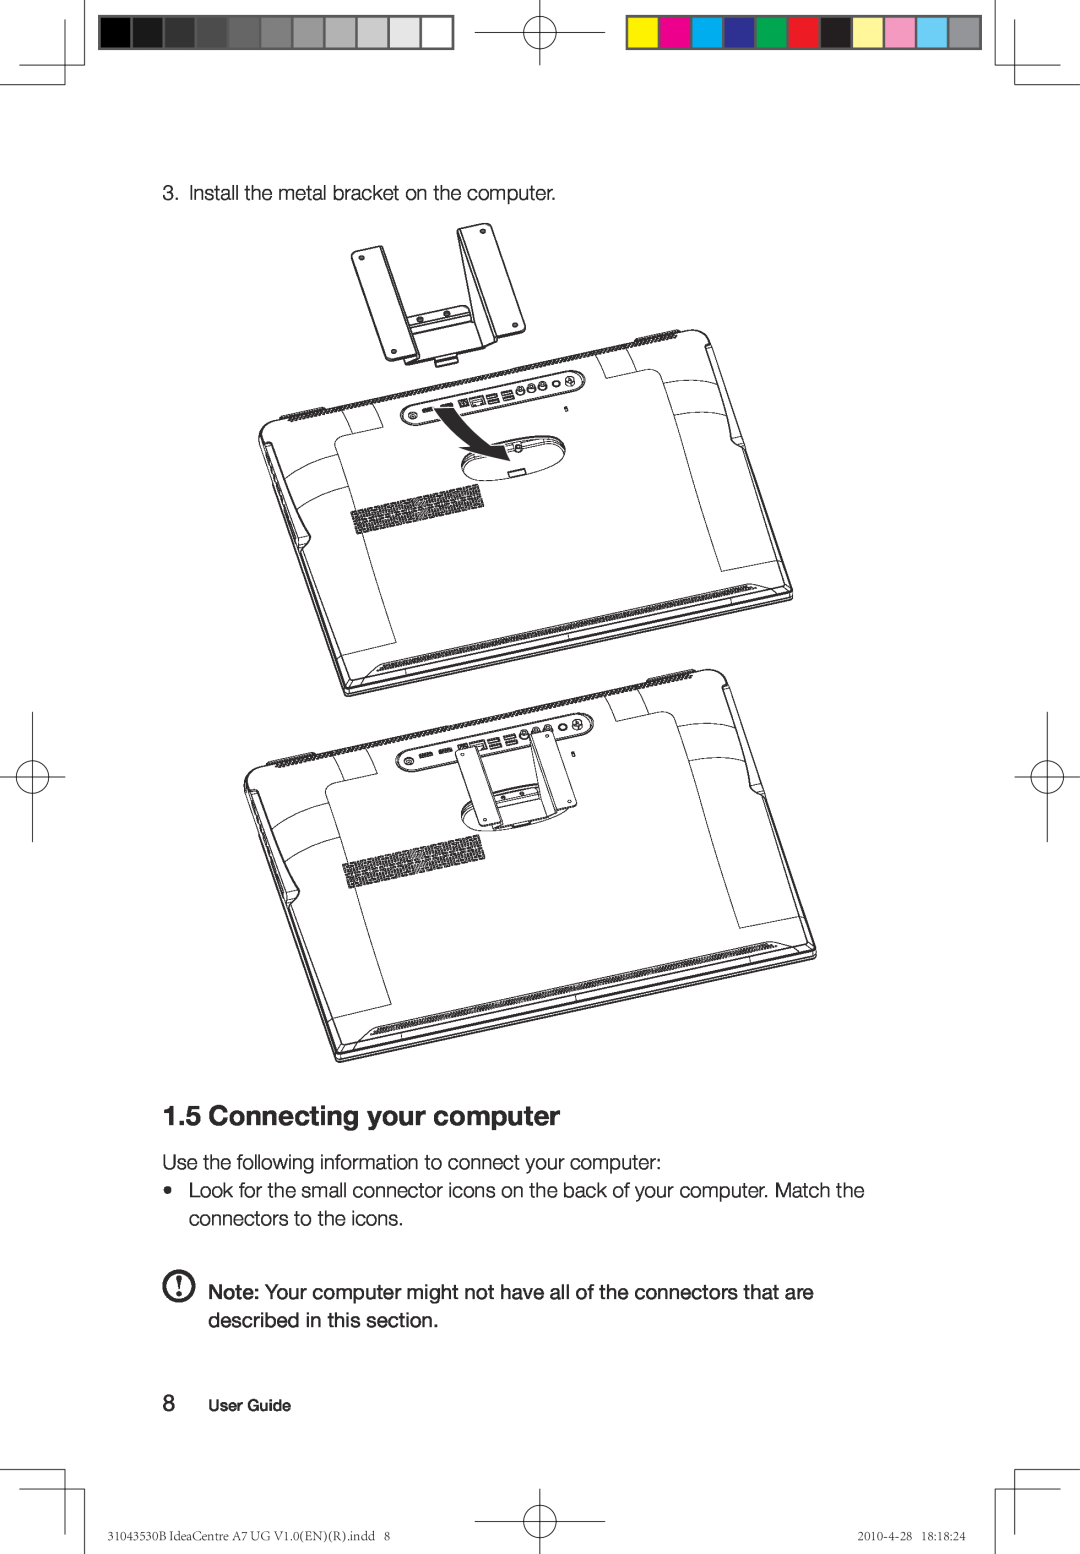 Lenovo A7 manual Connecting your computer, Install the metal bracket on the computer, User Guide, 2010-4-28 